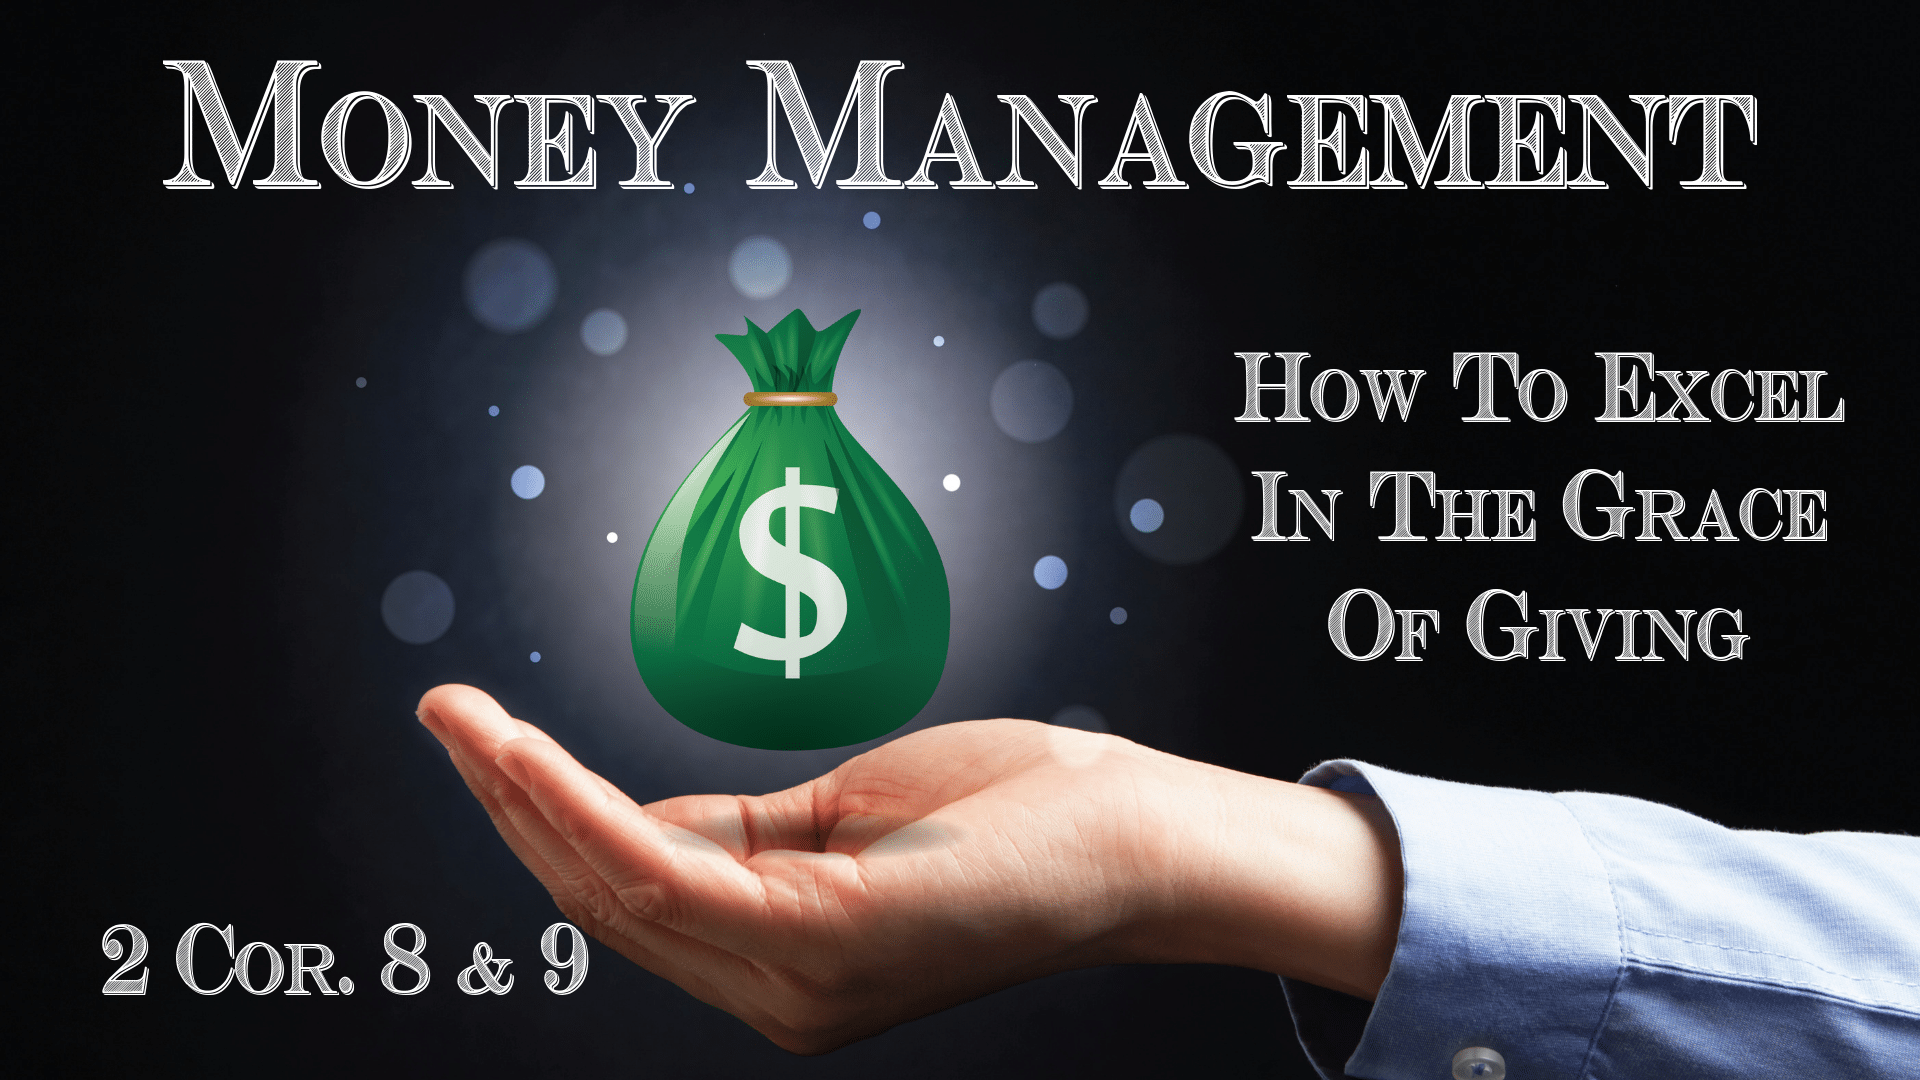 Money Management: How To Excel In The Grace Of Giving